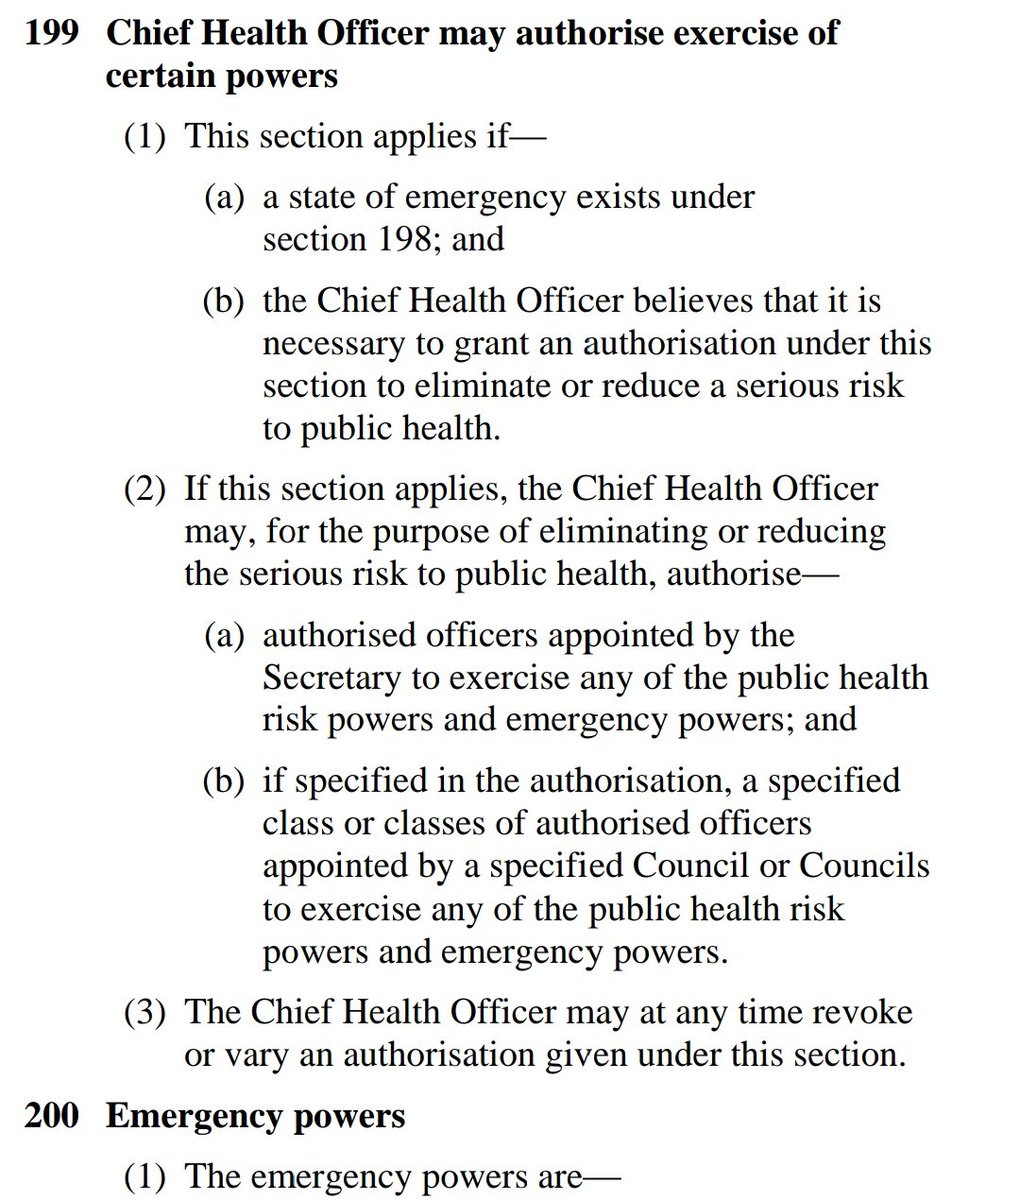 Any journalist who still didn't get it could find the answer in 5 minutes by consulting the Act as it currently stands. S198(7) on extending a state of emergency. And S199, "if the Chief Health Officer believes that it is necessary...serious risk to public health...*may*..."